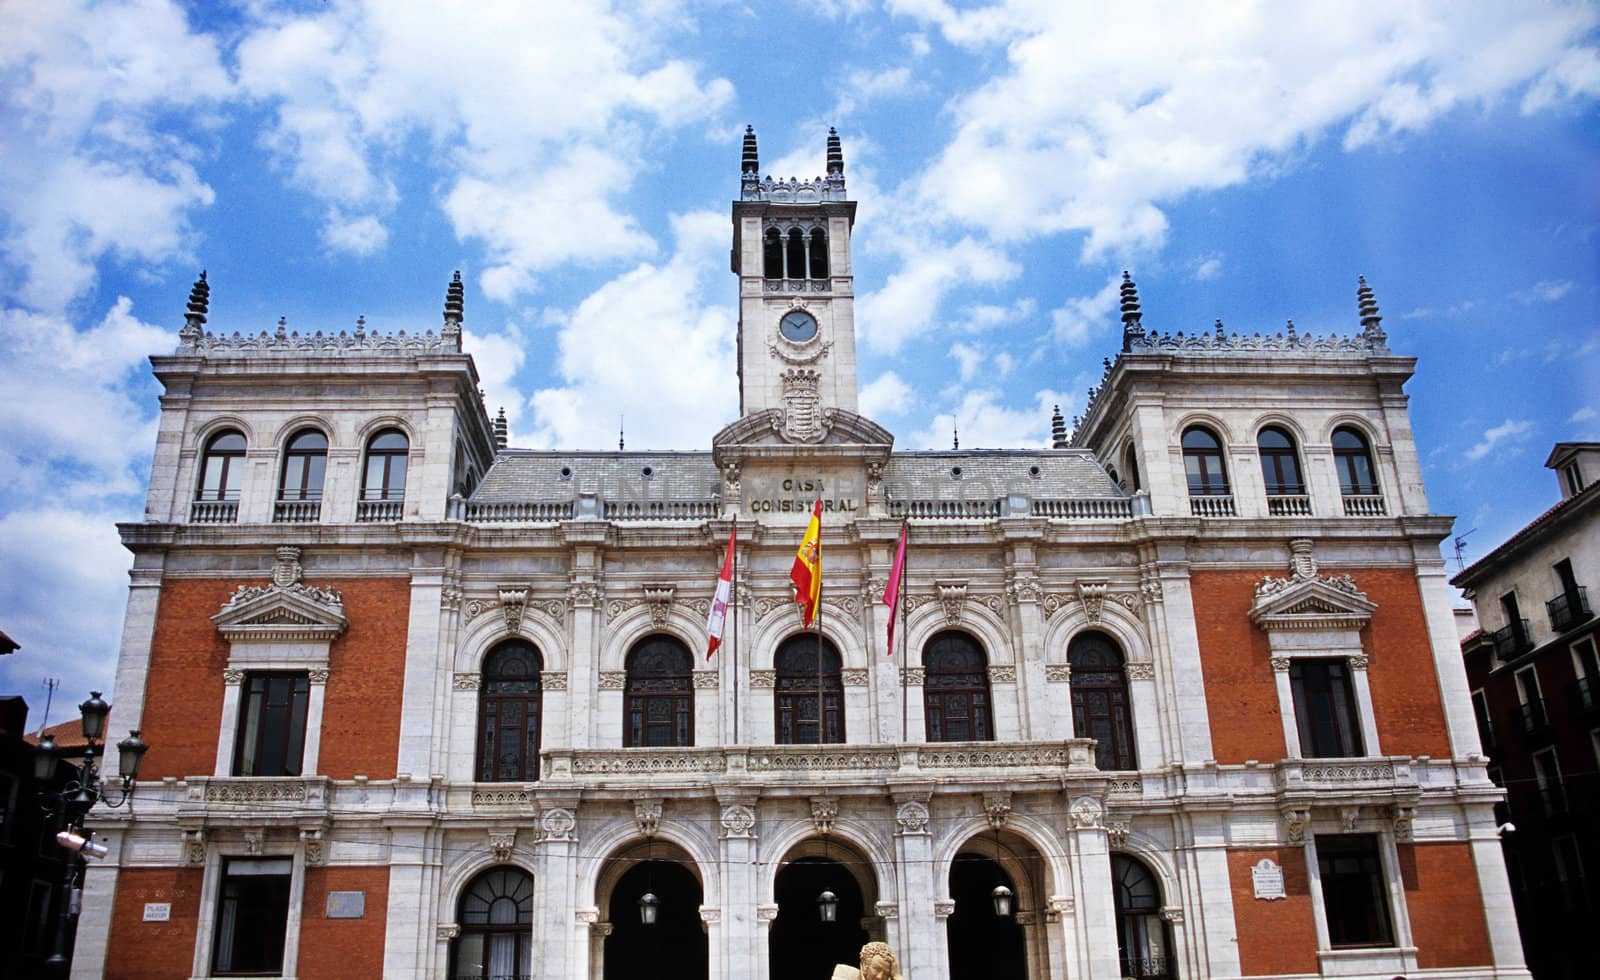 The Plaza Mayor in Valladolid, Spain is the centre of urban life.